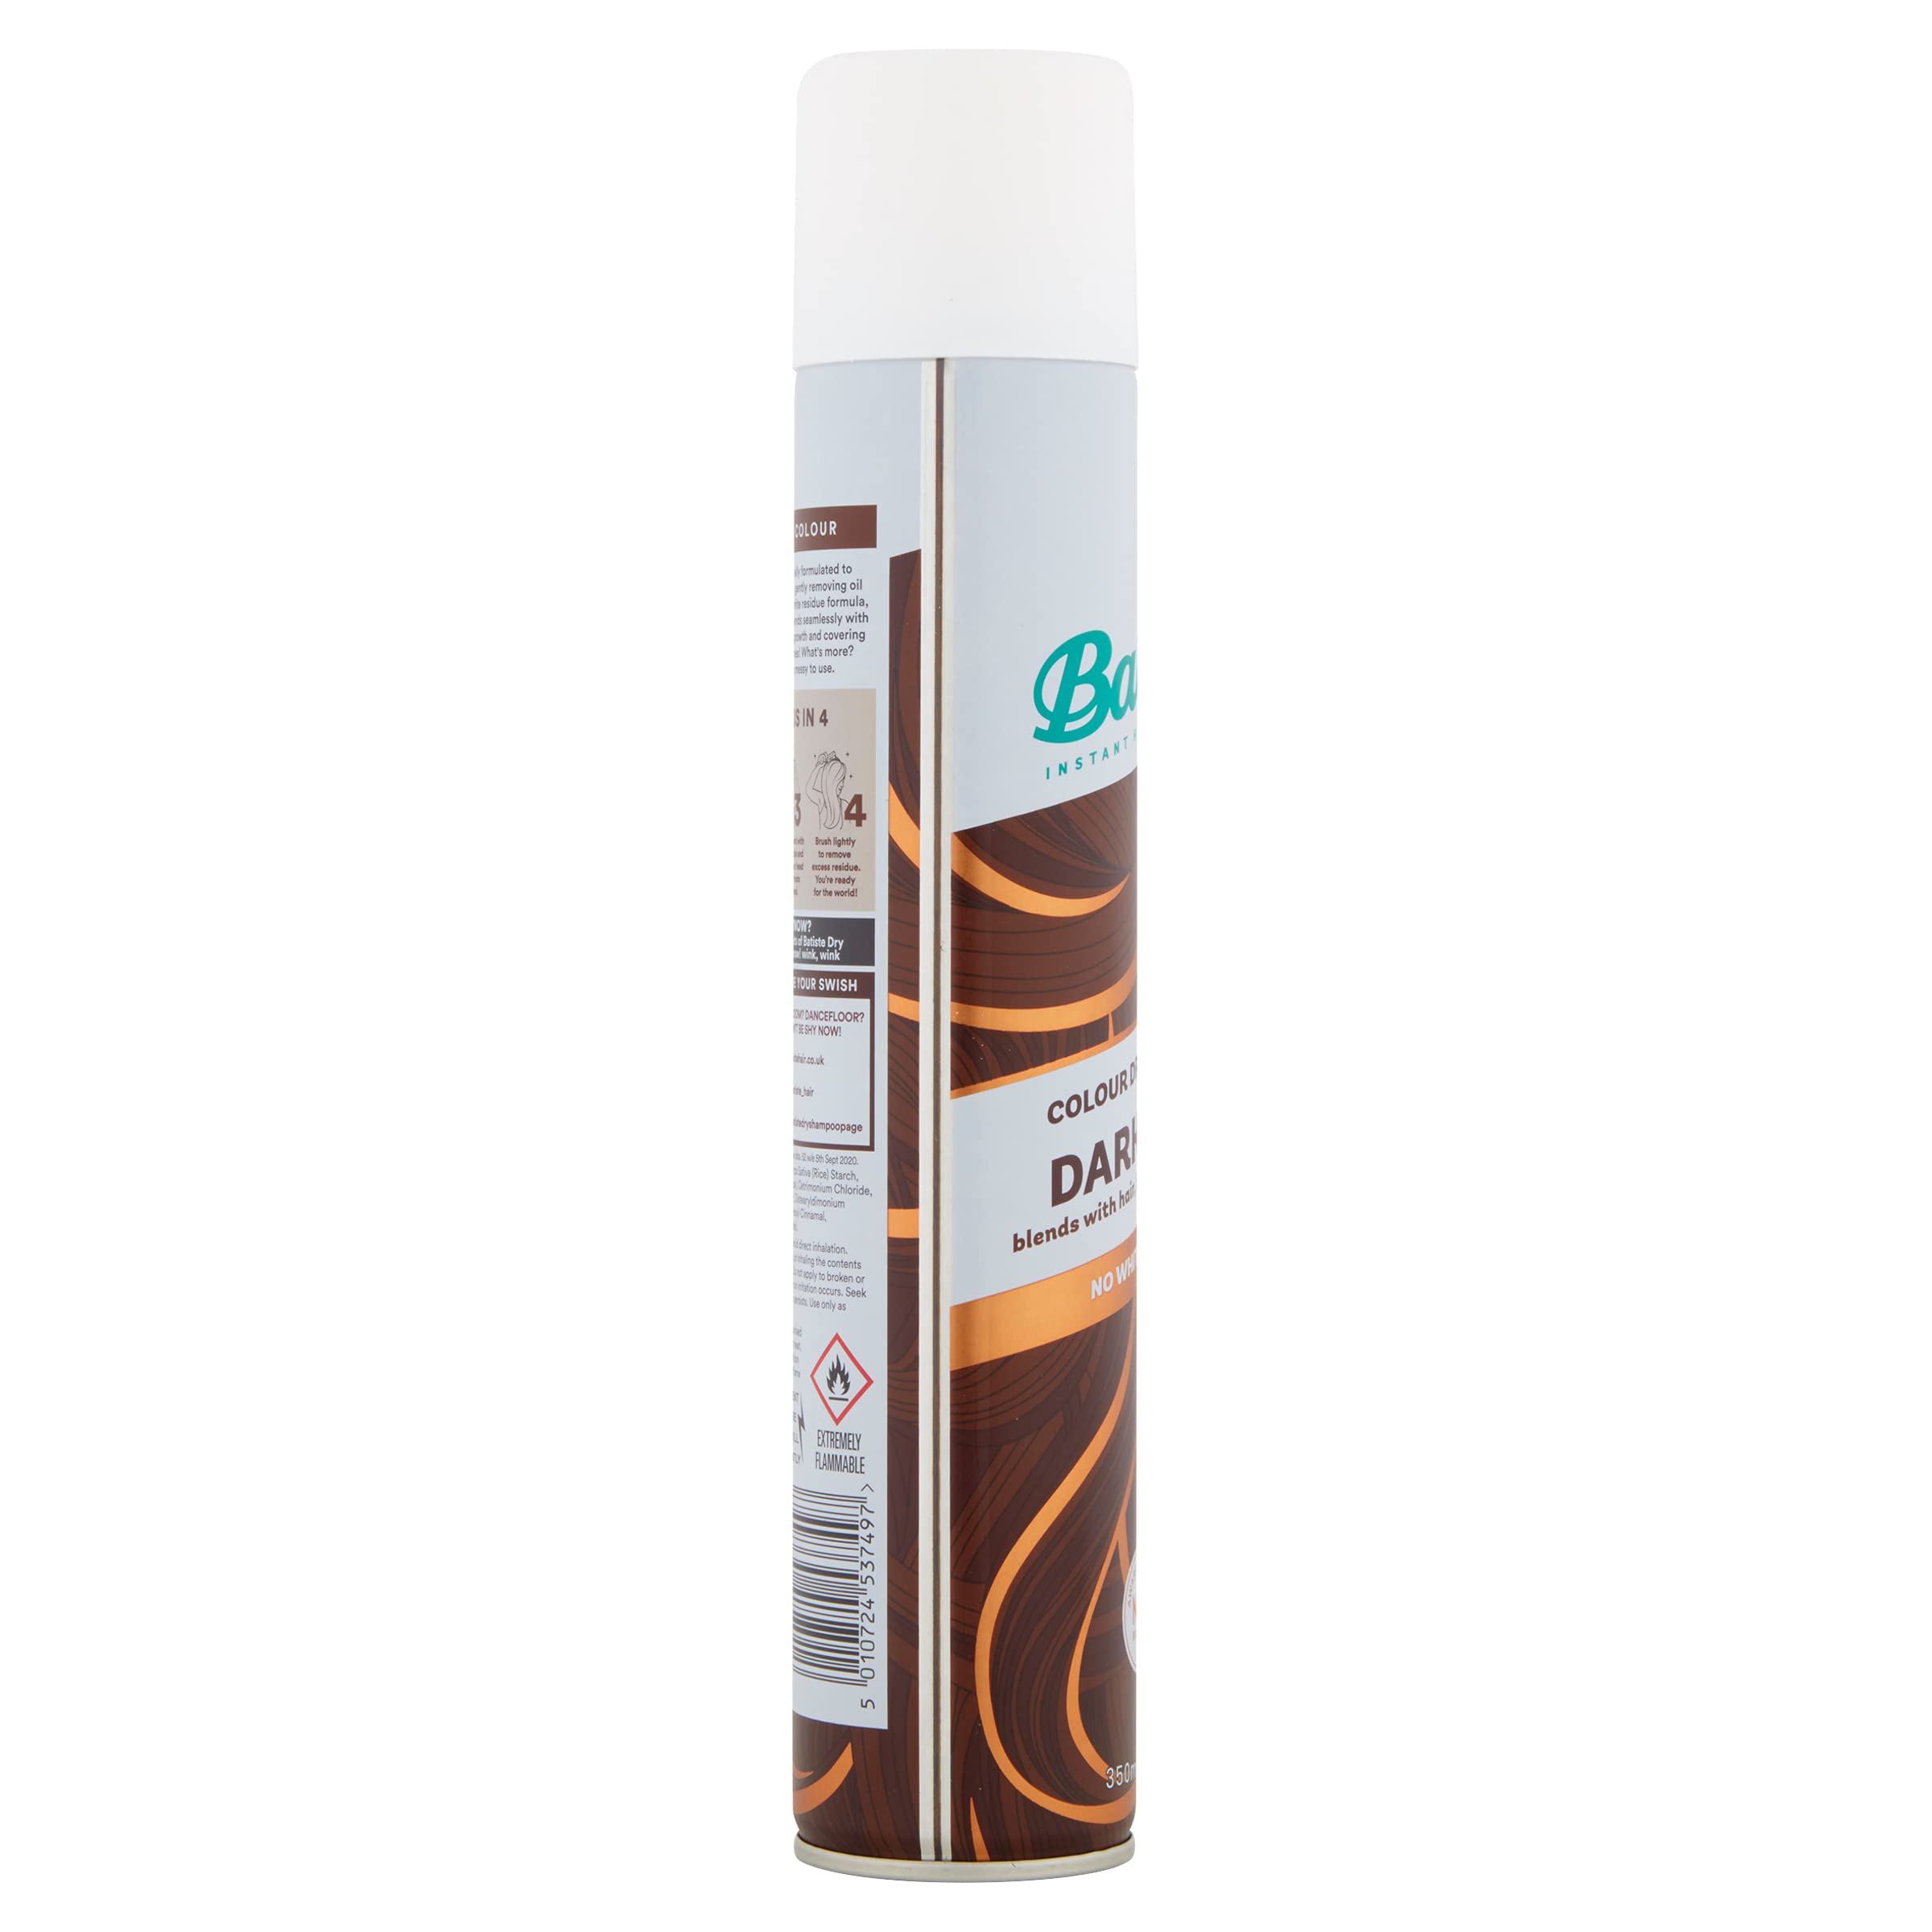 Batiste Dry Shampoo in Divine Dark with a Hint of Colour 350ml, Designed for Brunettes, No Rinse Spray to Refresh Hair in Between Washes, No White Residue for Dark Hair